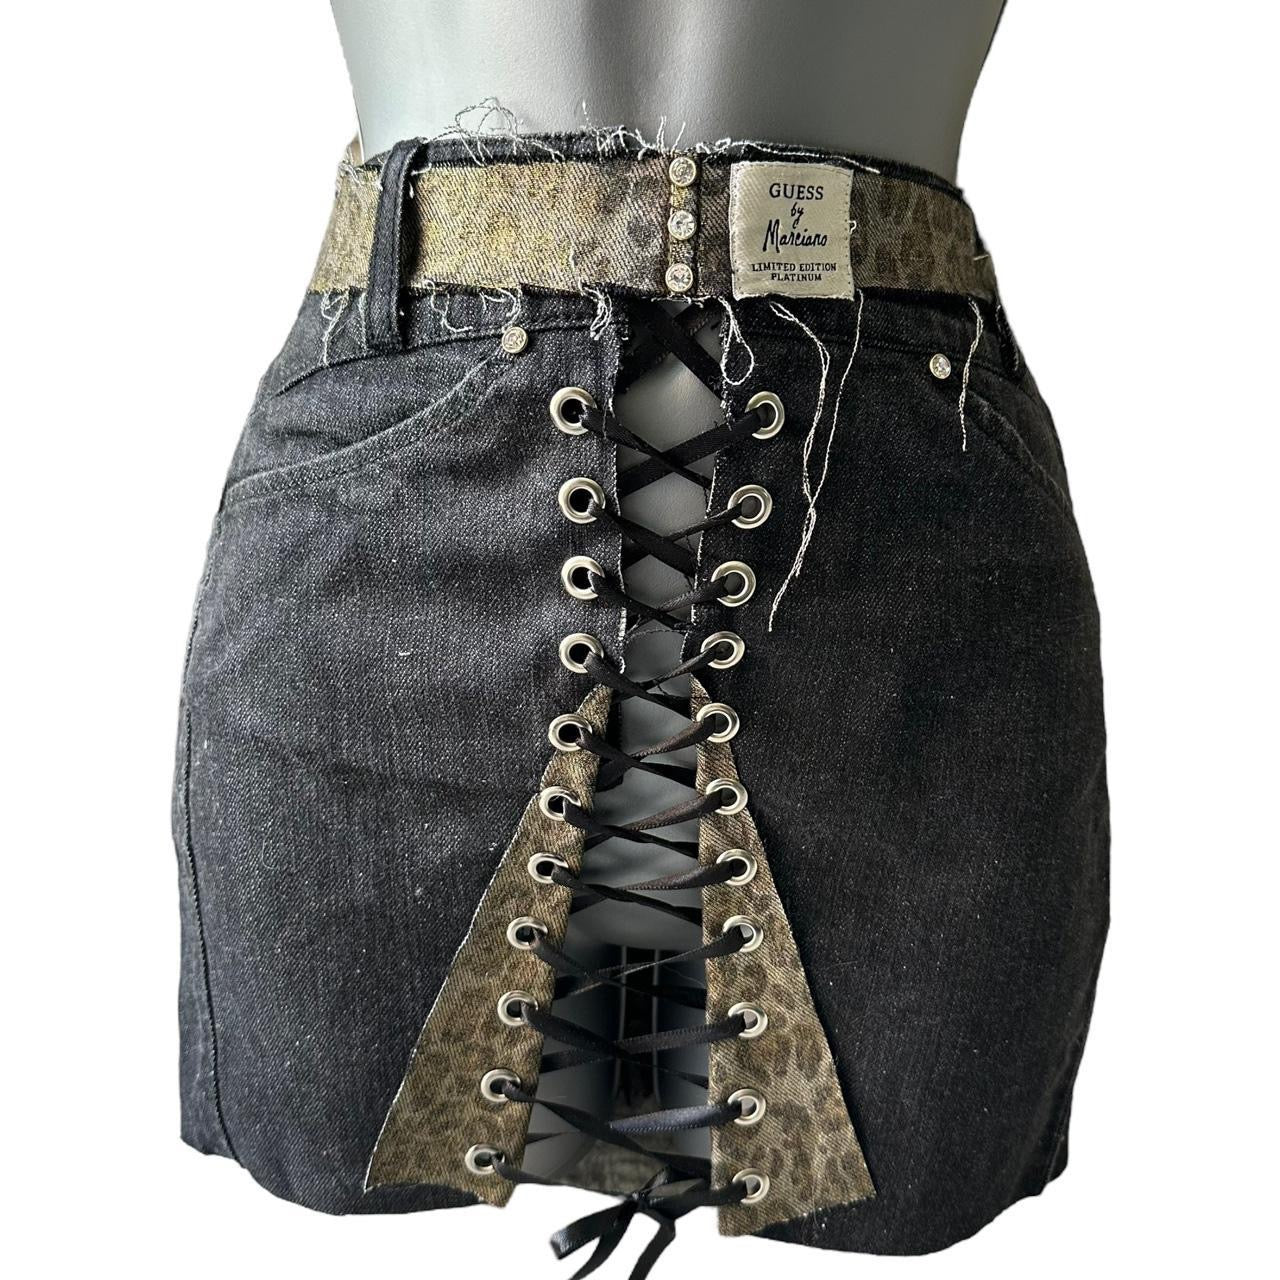 Authentic Guess Jeans Reworked into a Denim Corset Mini Skirt XS 6 8